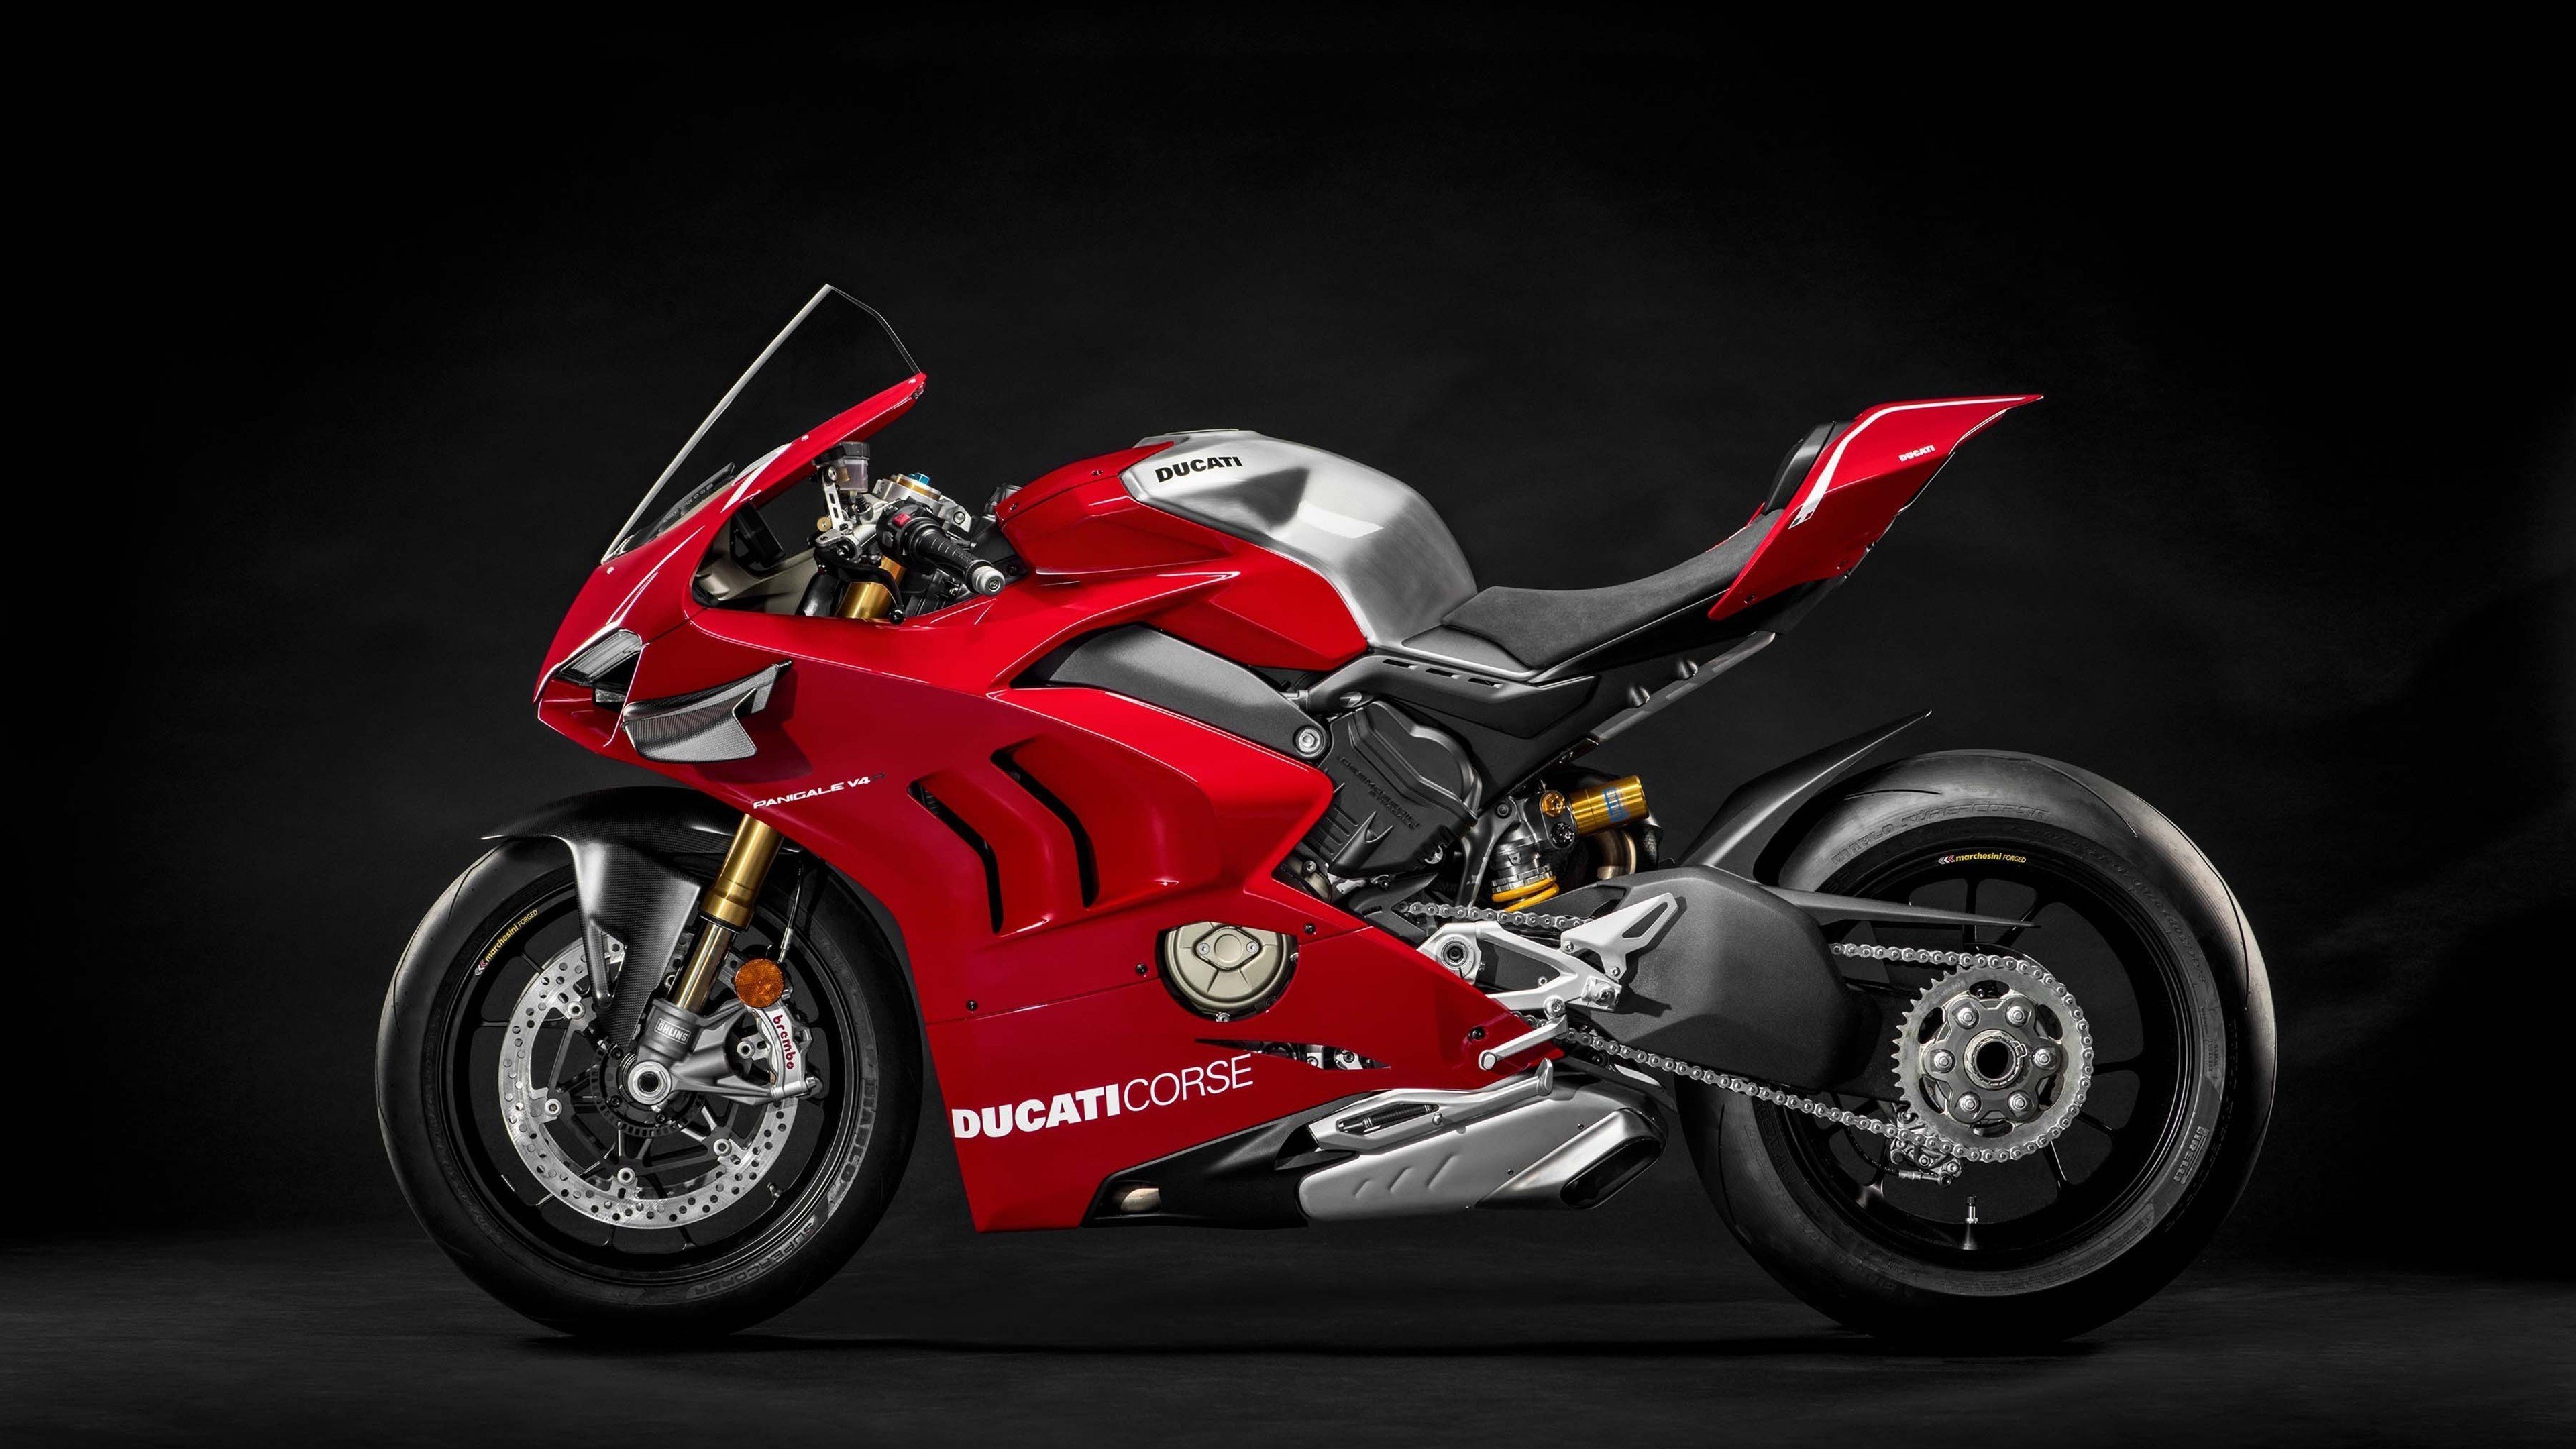 2019 Ducati Panigale V4 R Motorcycle HD Wallpapers 3840x2160